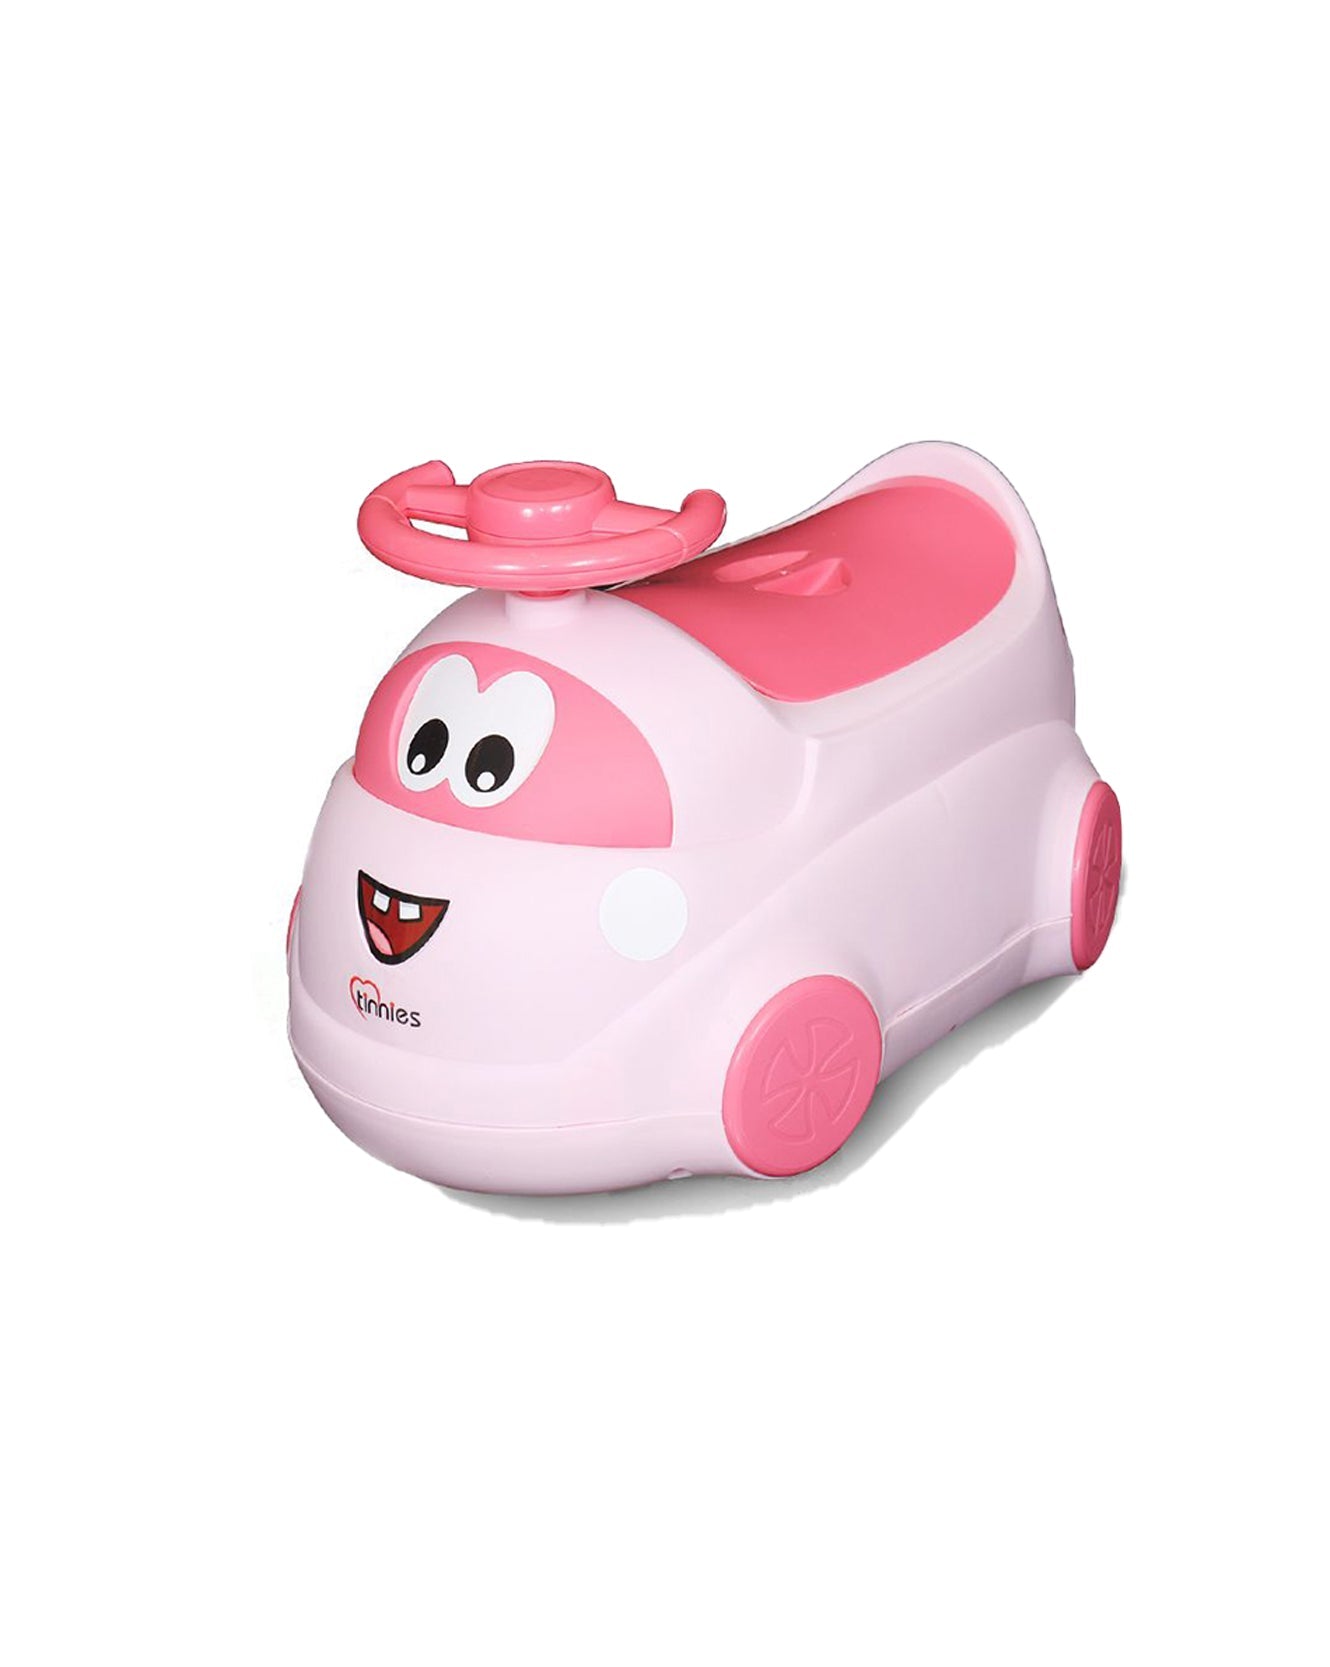 Tinnies Baby Driver Potty (Multi Color)